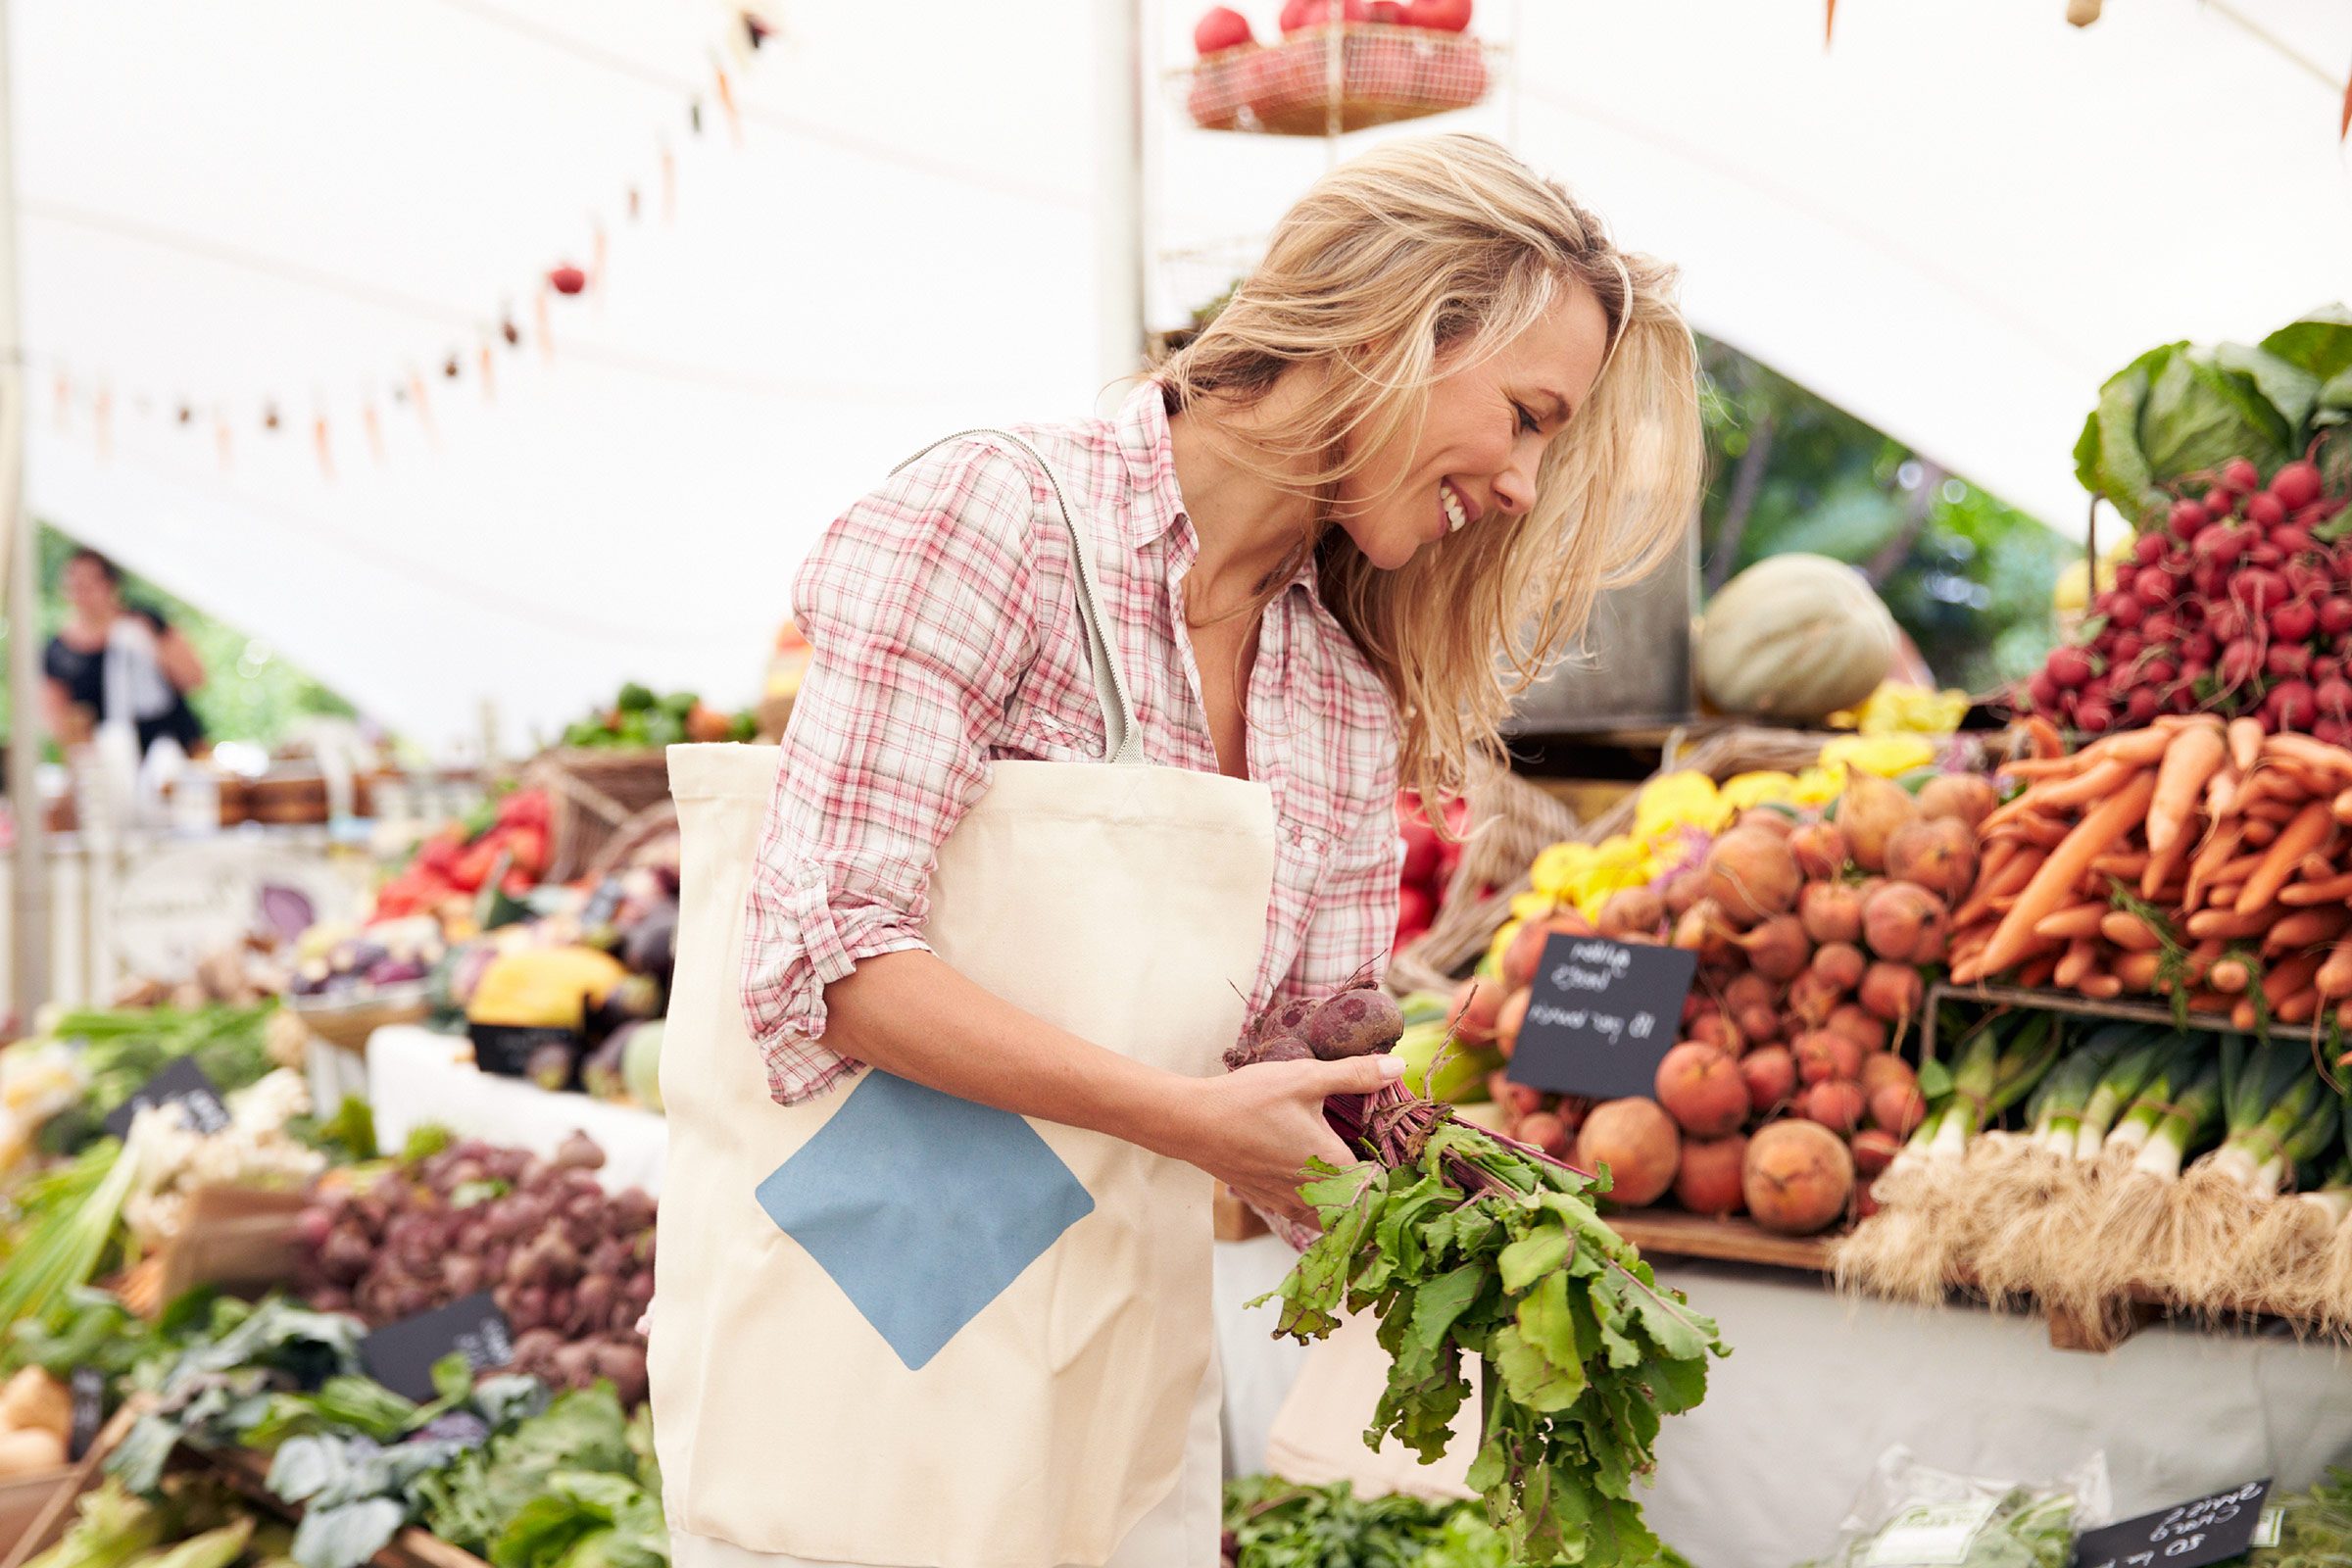 things you didn't know about organic food | reader's digest